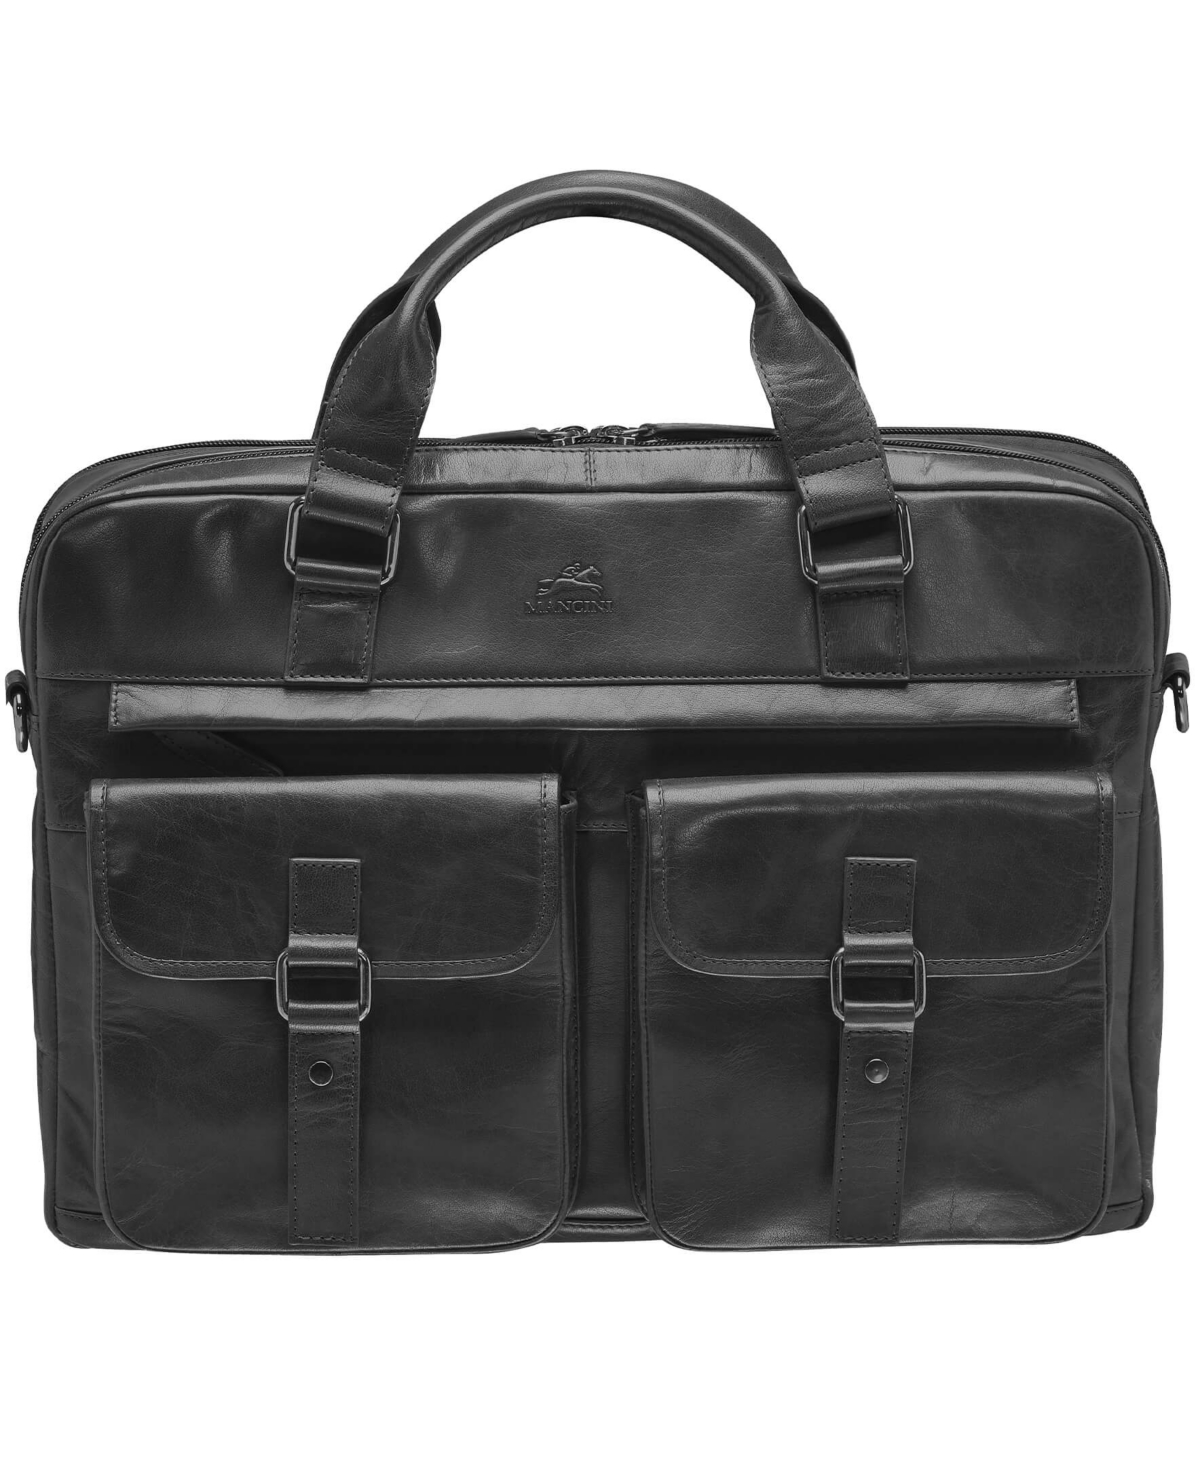 Men's Buffalo Briefcase with Dual Compartments for 15.6" Laptop - Brown